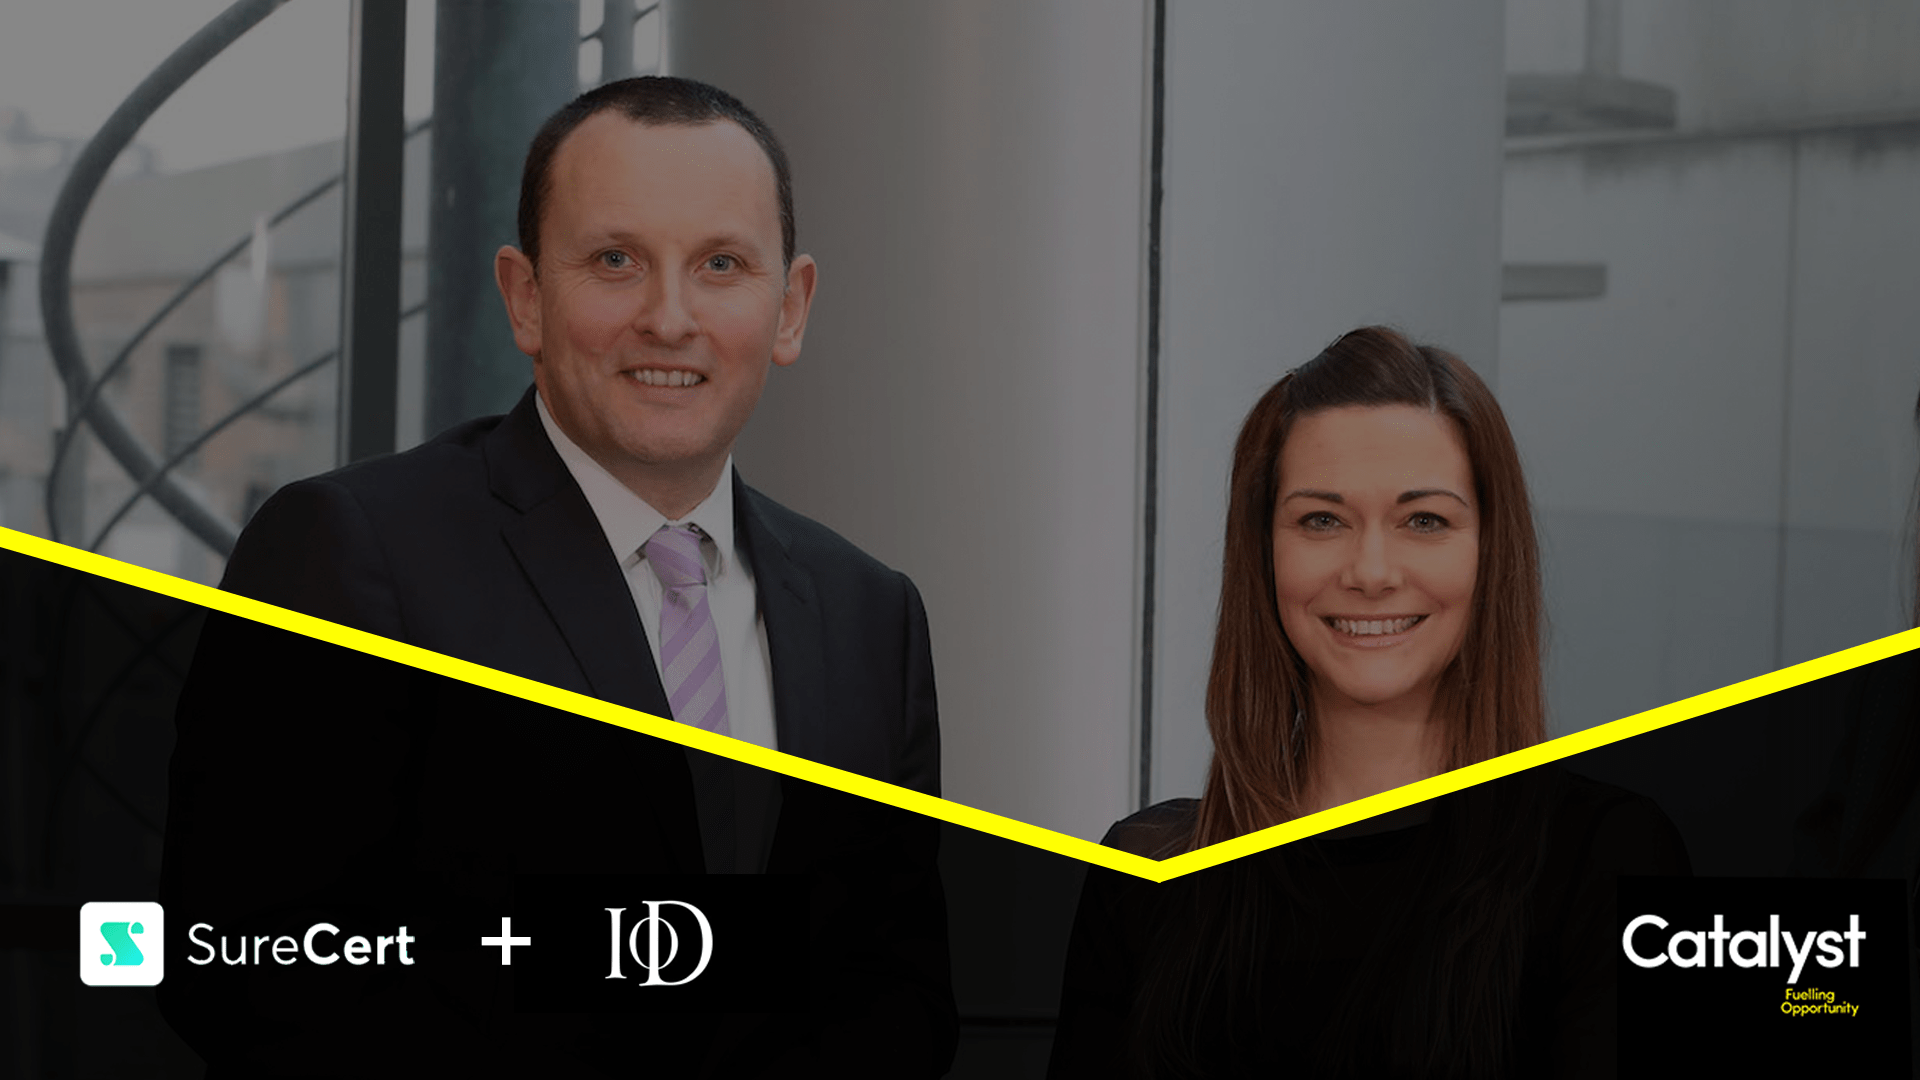 SureCert and IOD to launch new instant matching service for displaced workers and companies.